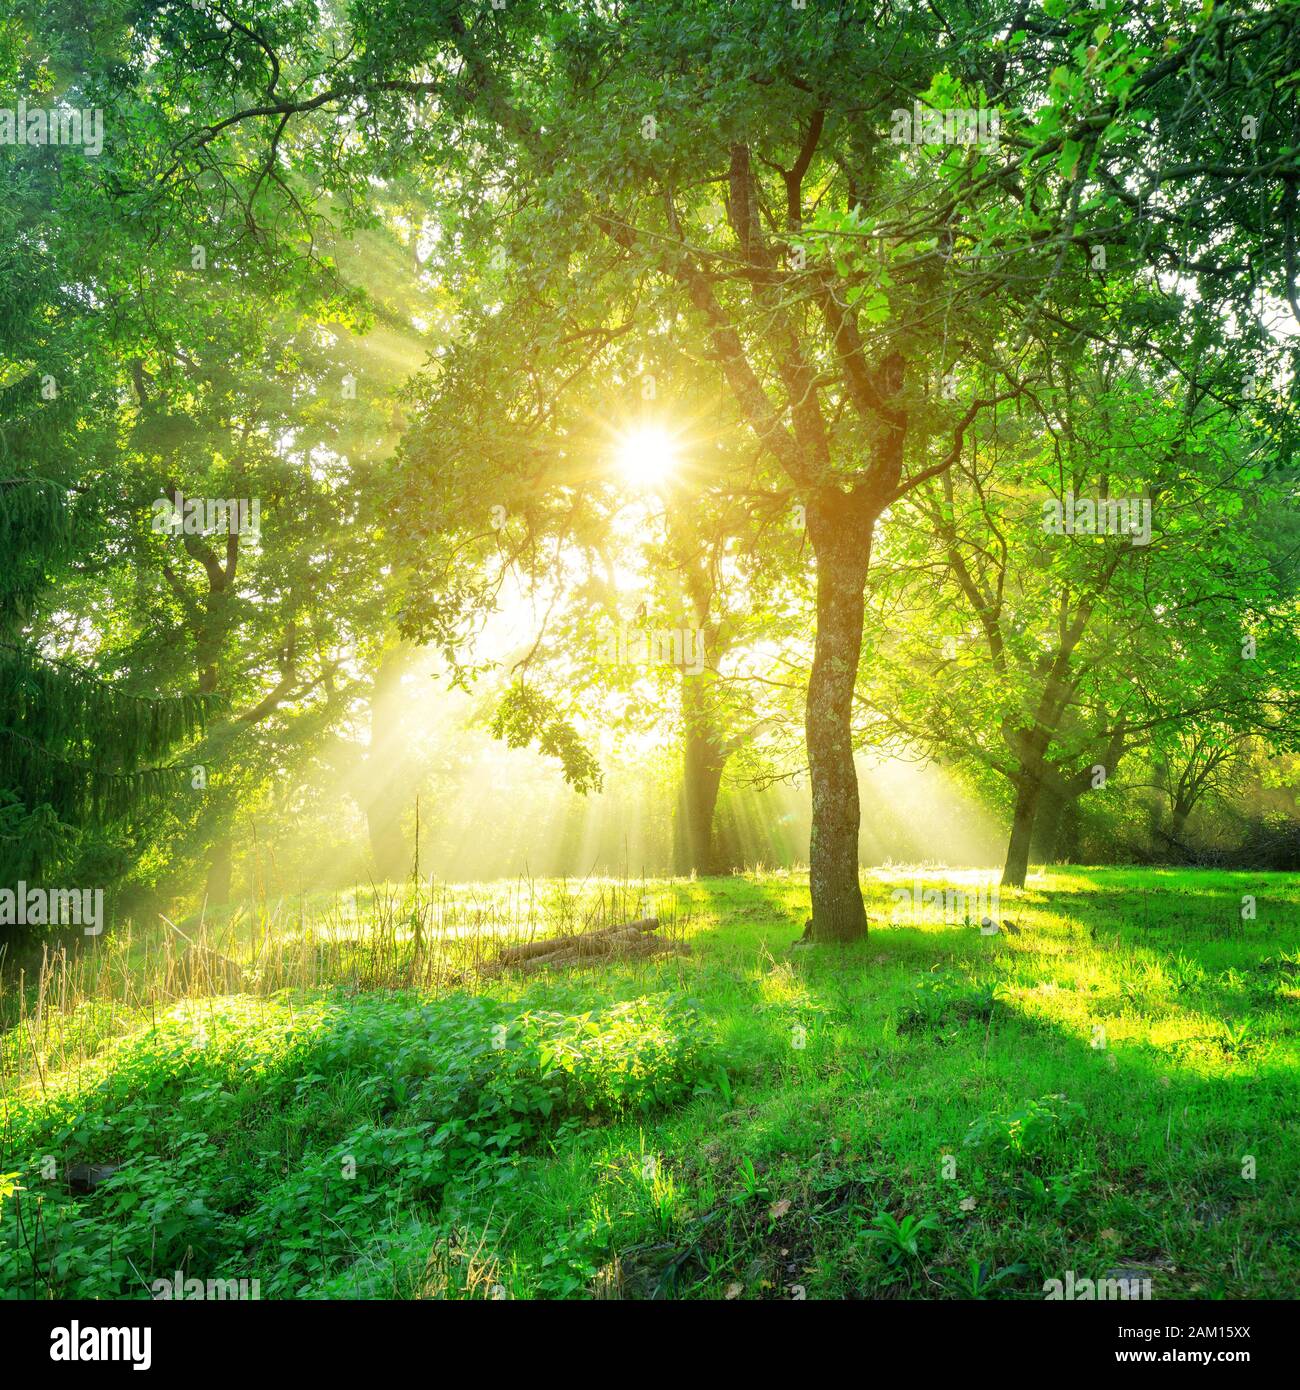 Green forest background with morning sunrise in spring season. Nature landscape. Stock Photo